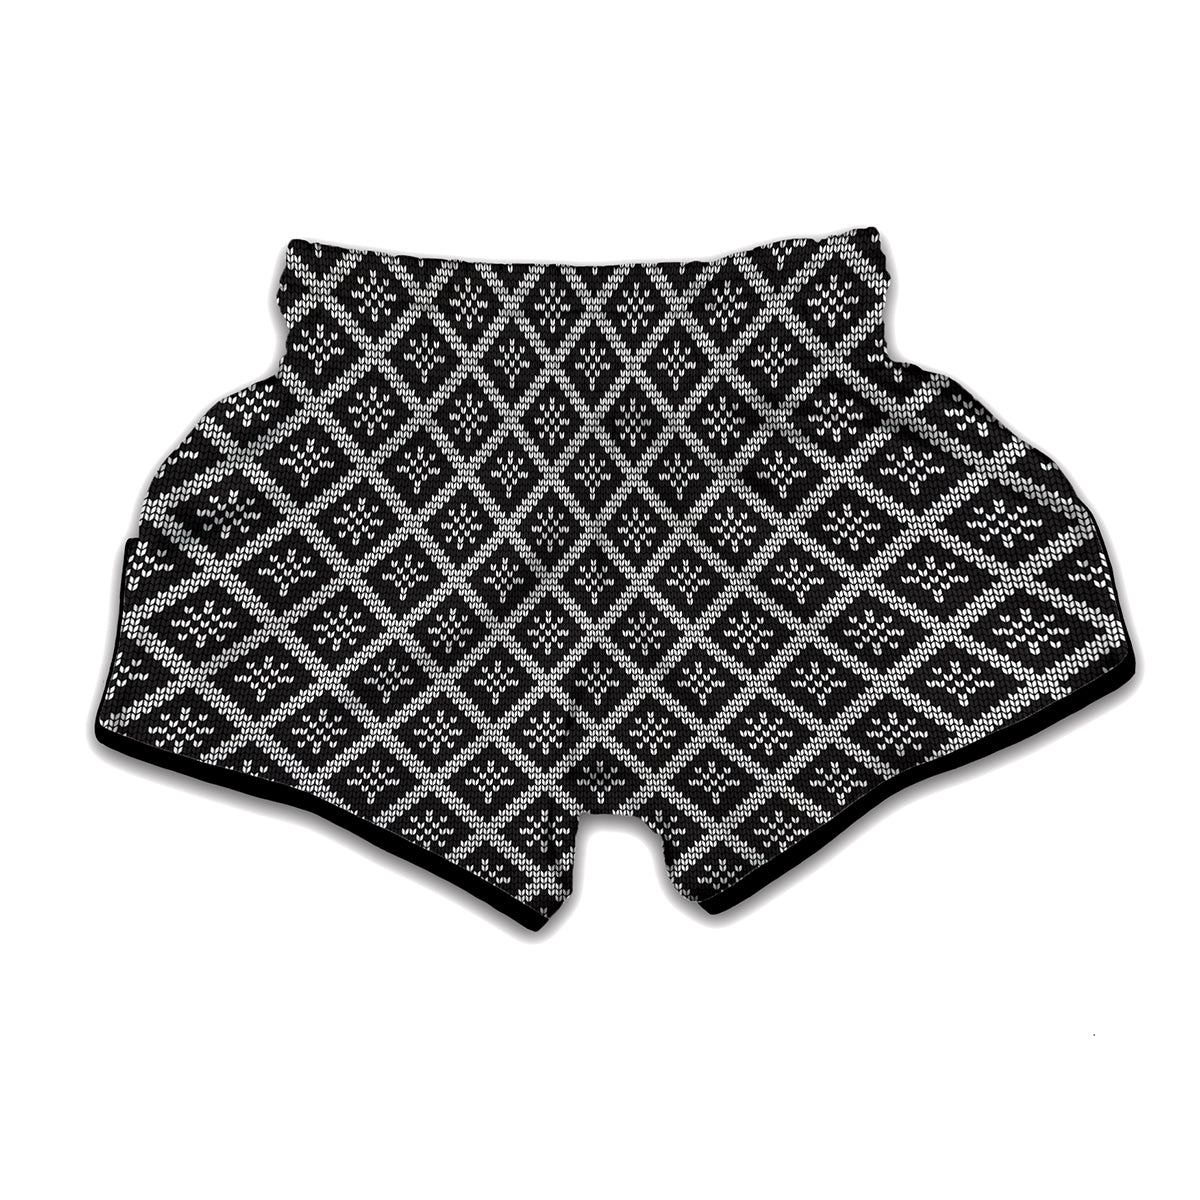 Black And White Knitted Pattern Print Muay Thai Boxing Shorts